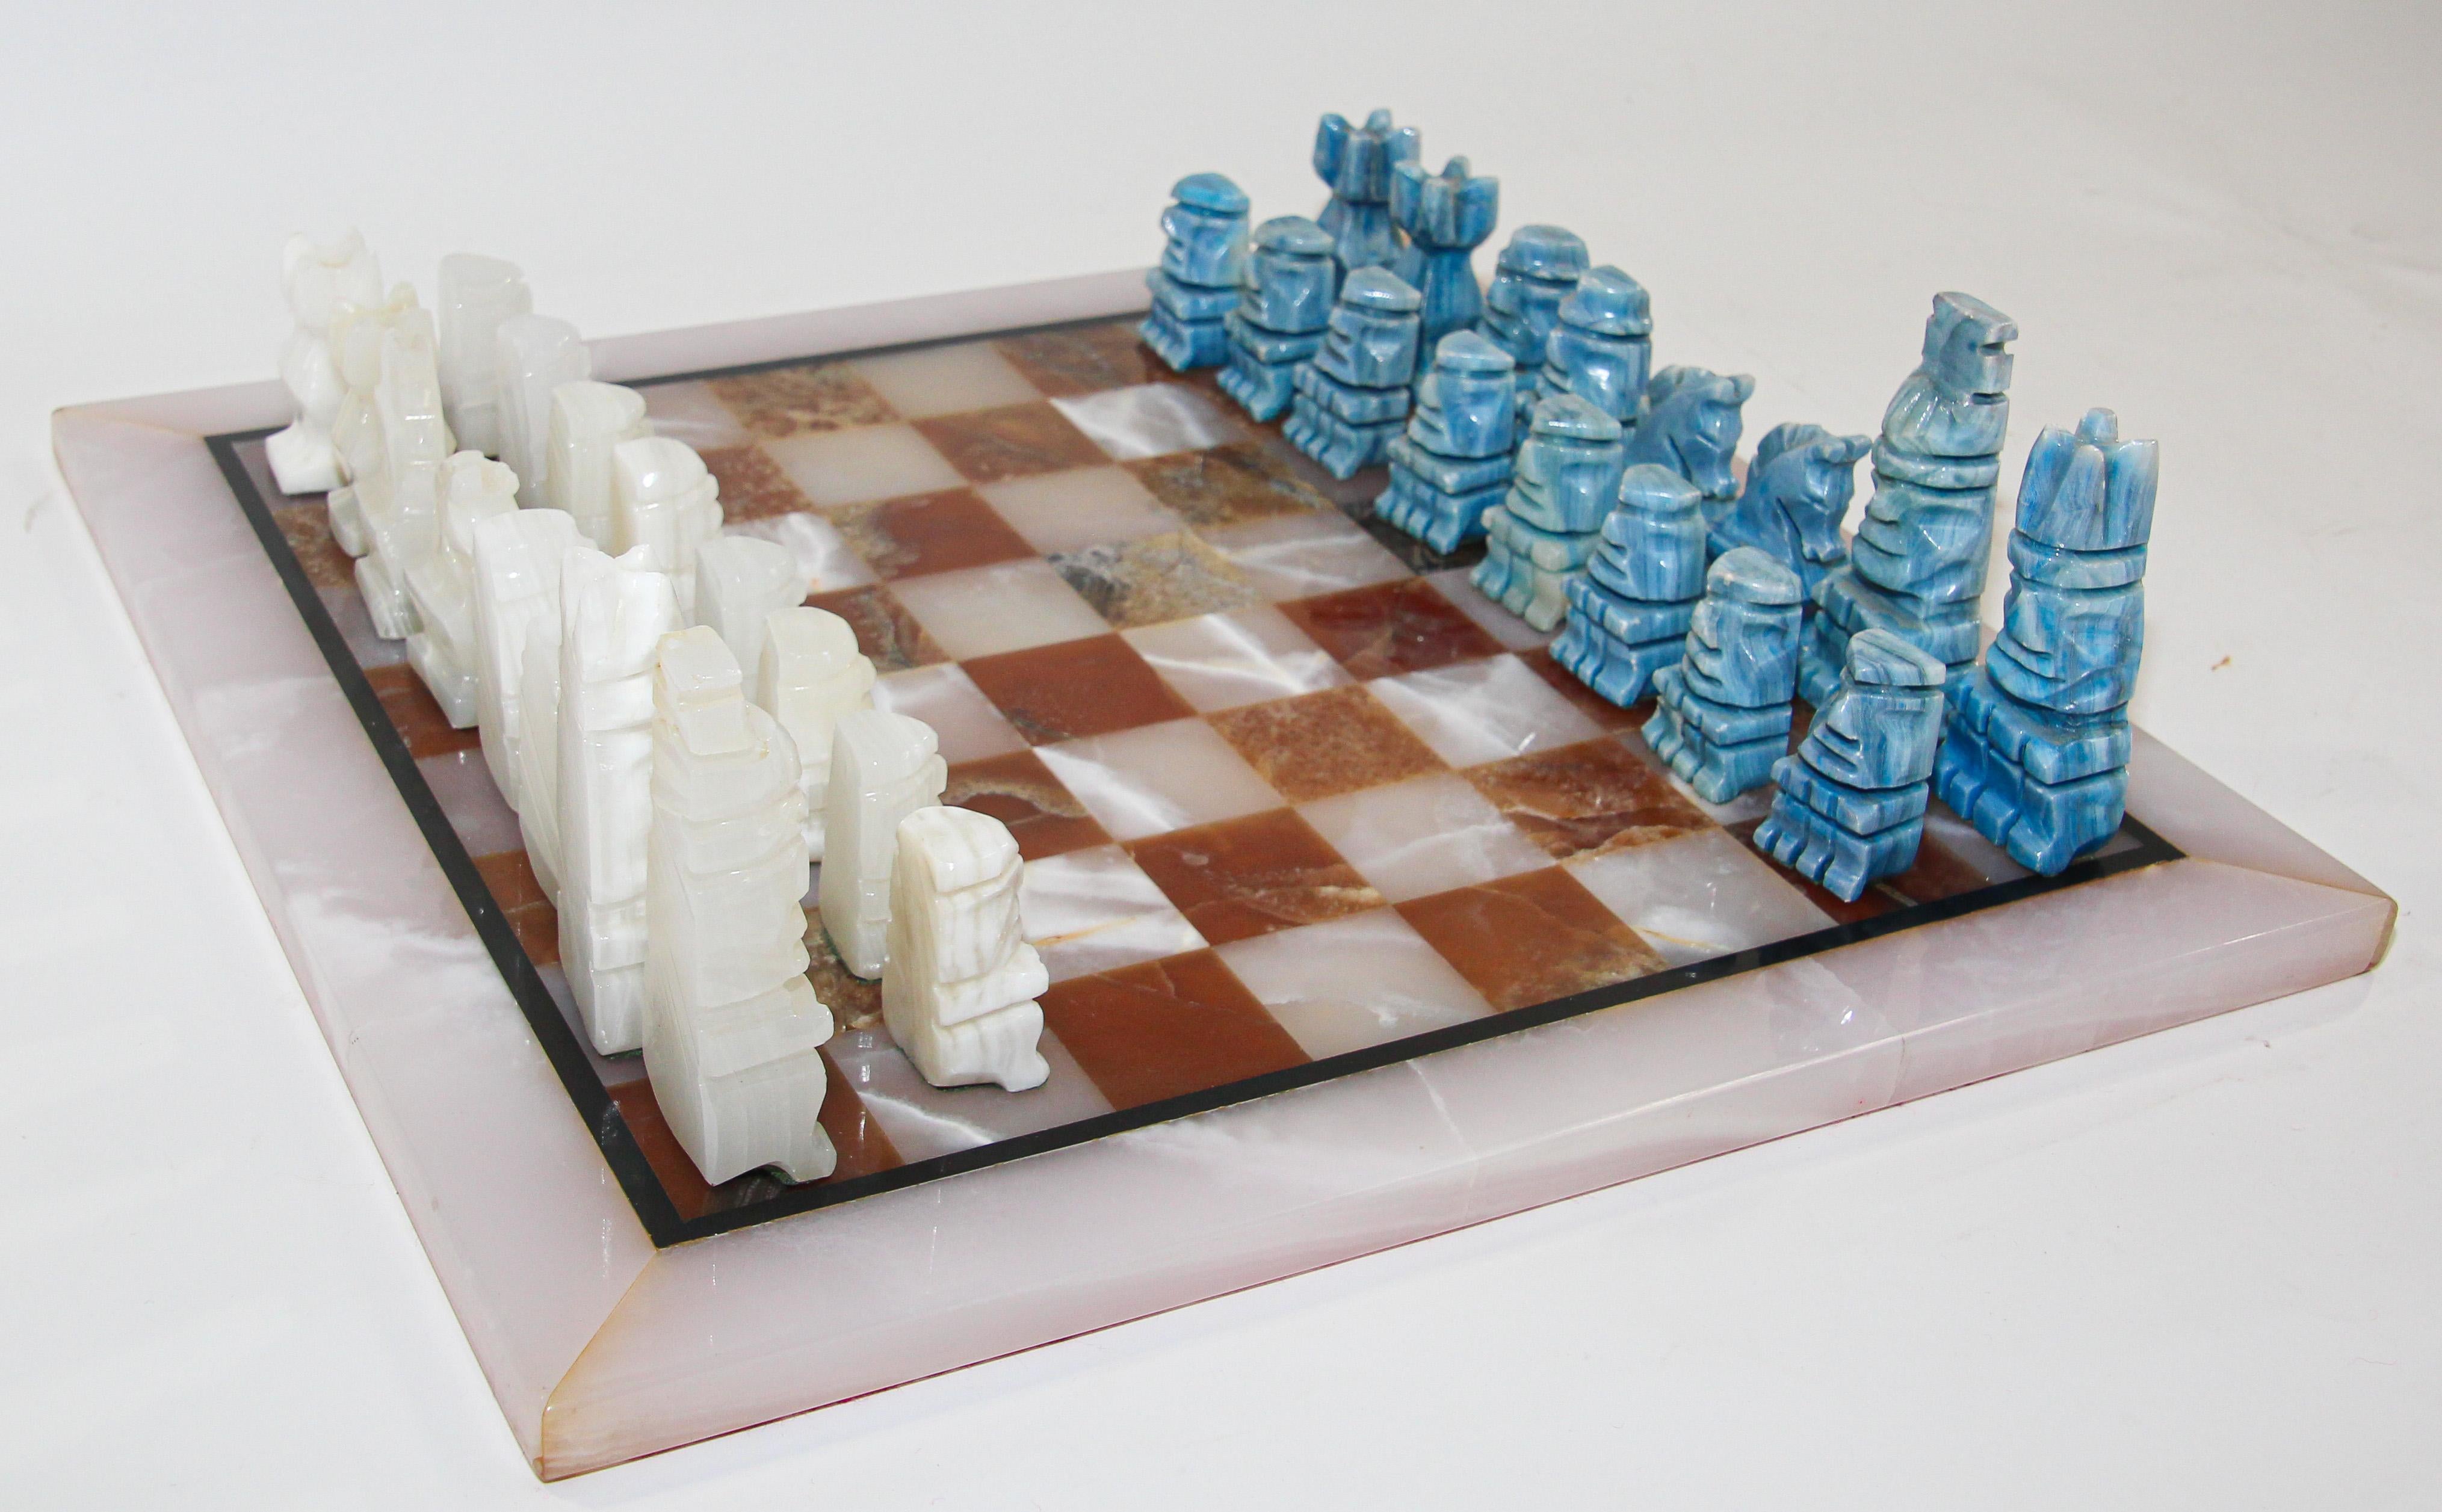 Vintage mid 20th century Mexican stone marble chess set complete board in white and brown marble with elaborately hand carved turquoise and white chess pieces
The stone chess set game contains all its hand crafted onyx pieces that are beautifully